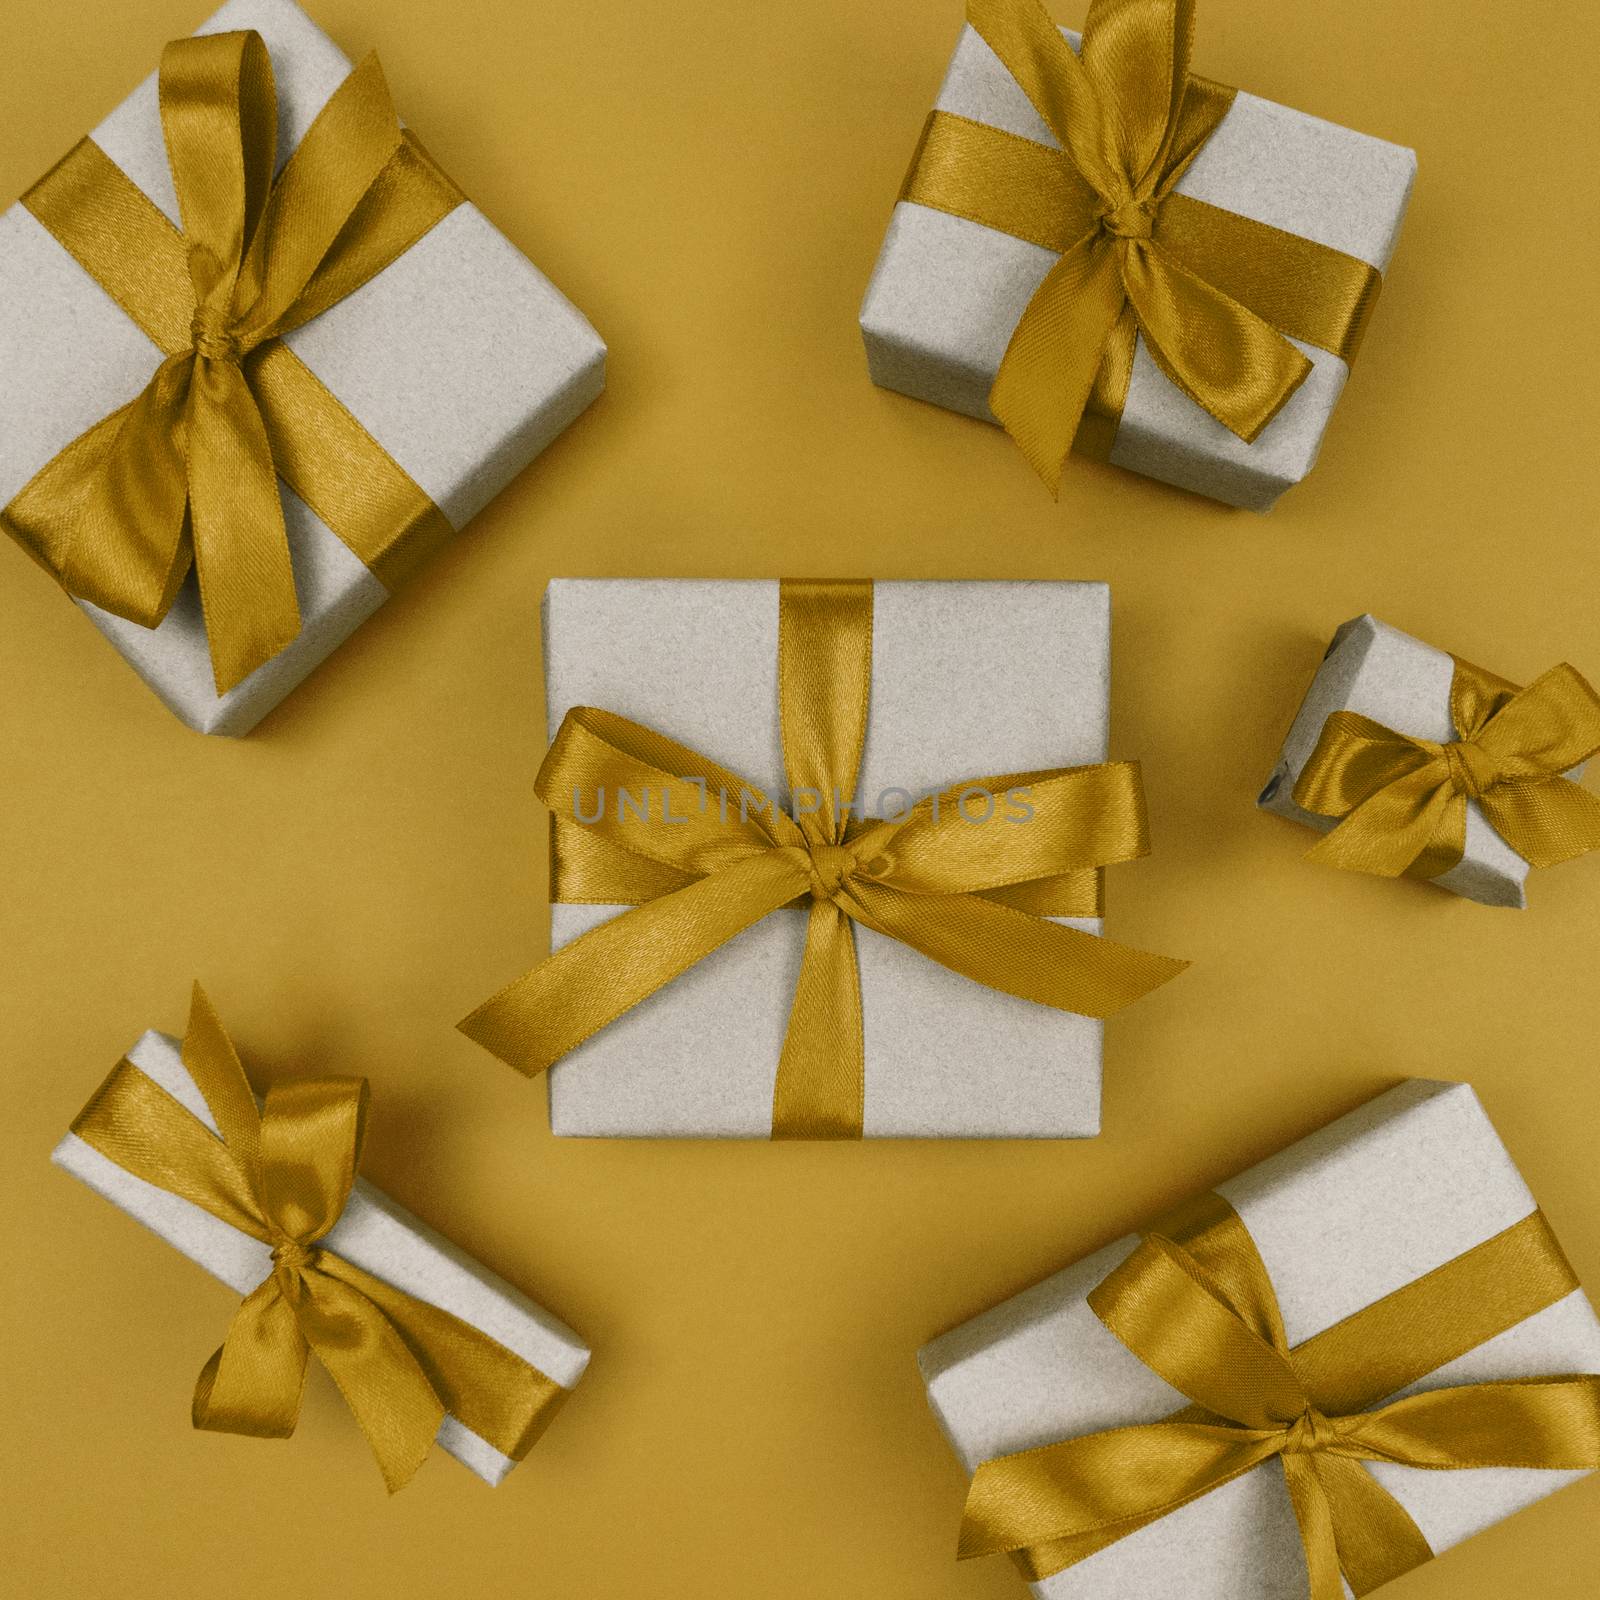 Gift boxes wrapped in a craft paper with yellow ribbons and bows. Festive monochrome flat lay.